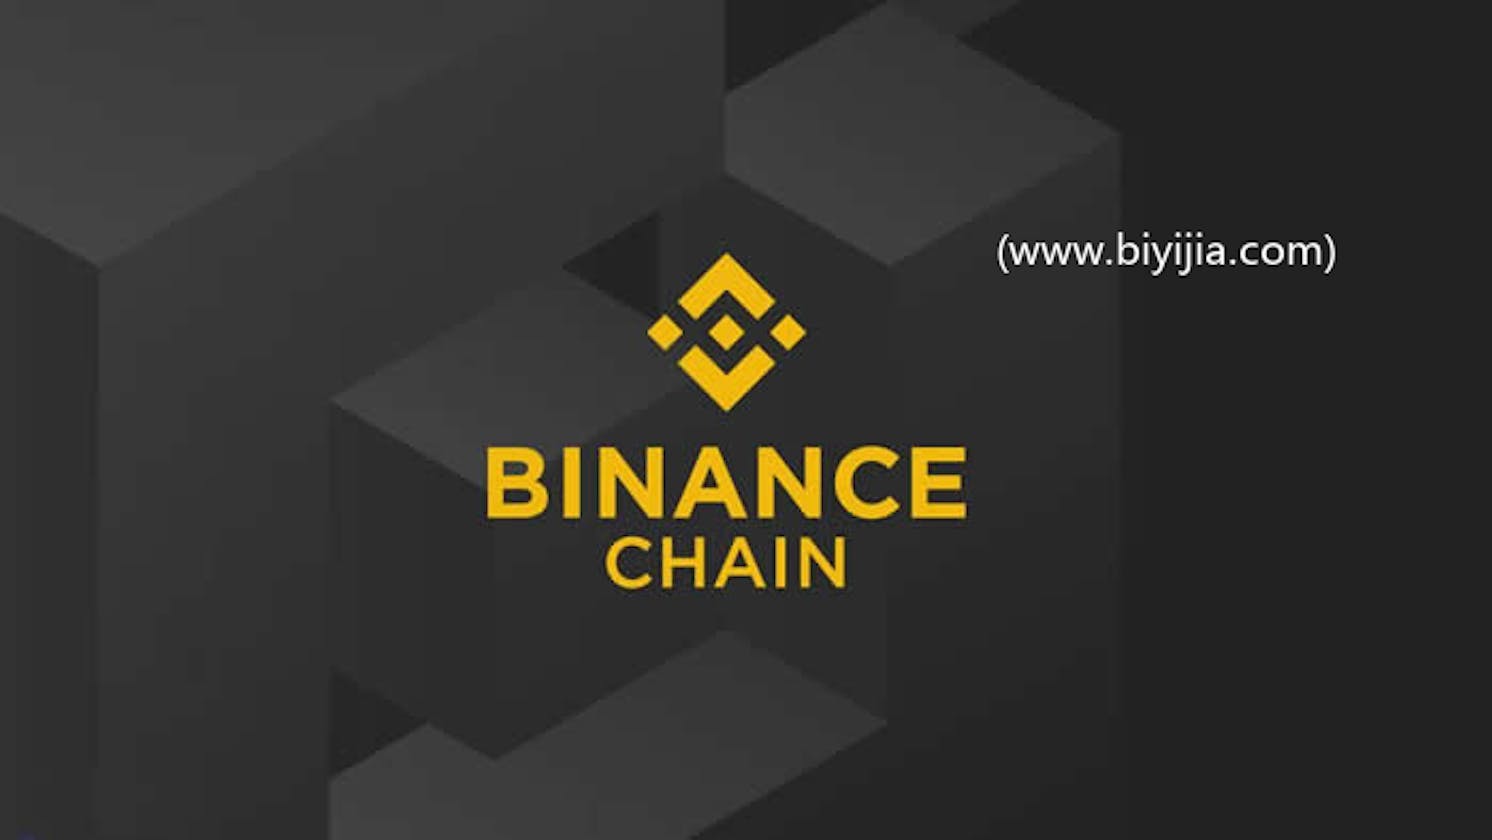 The BNB Chain, formerly known as Binance Smart Chain (BSC), is a blockchain network. It is an alternative to the Ethereum network and provides faster transaction speeds and lower fees compared to the Ethereum network. The BNB Chain consists of two ma